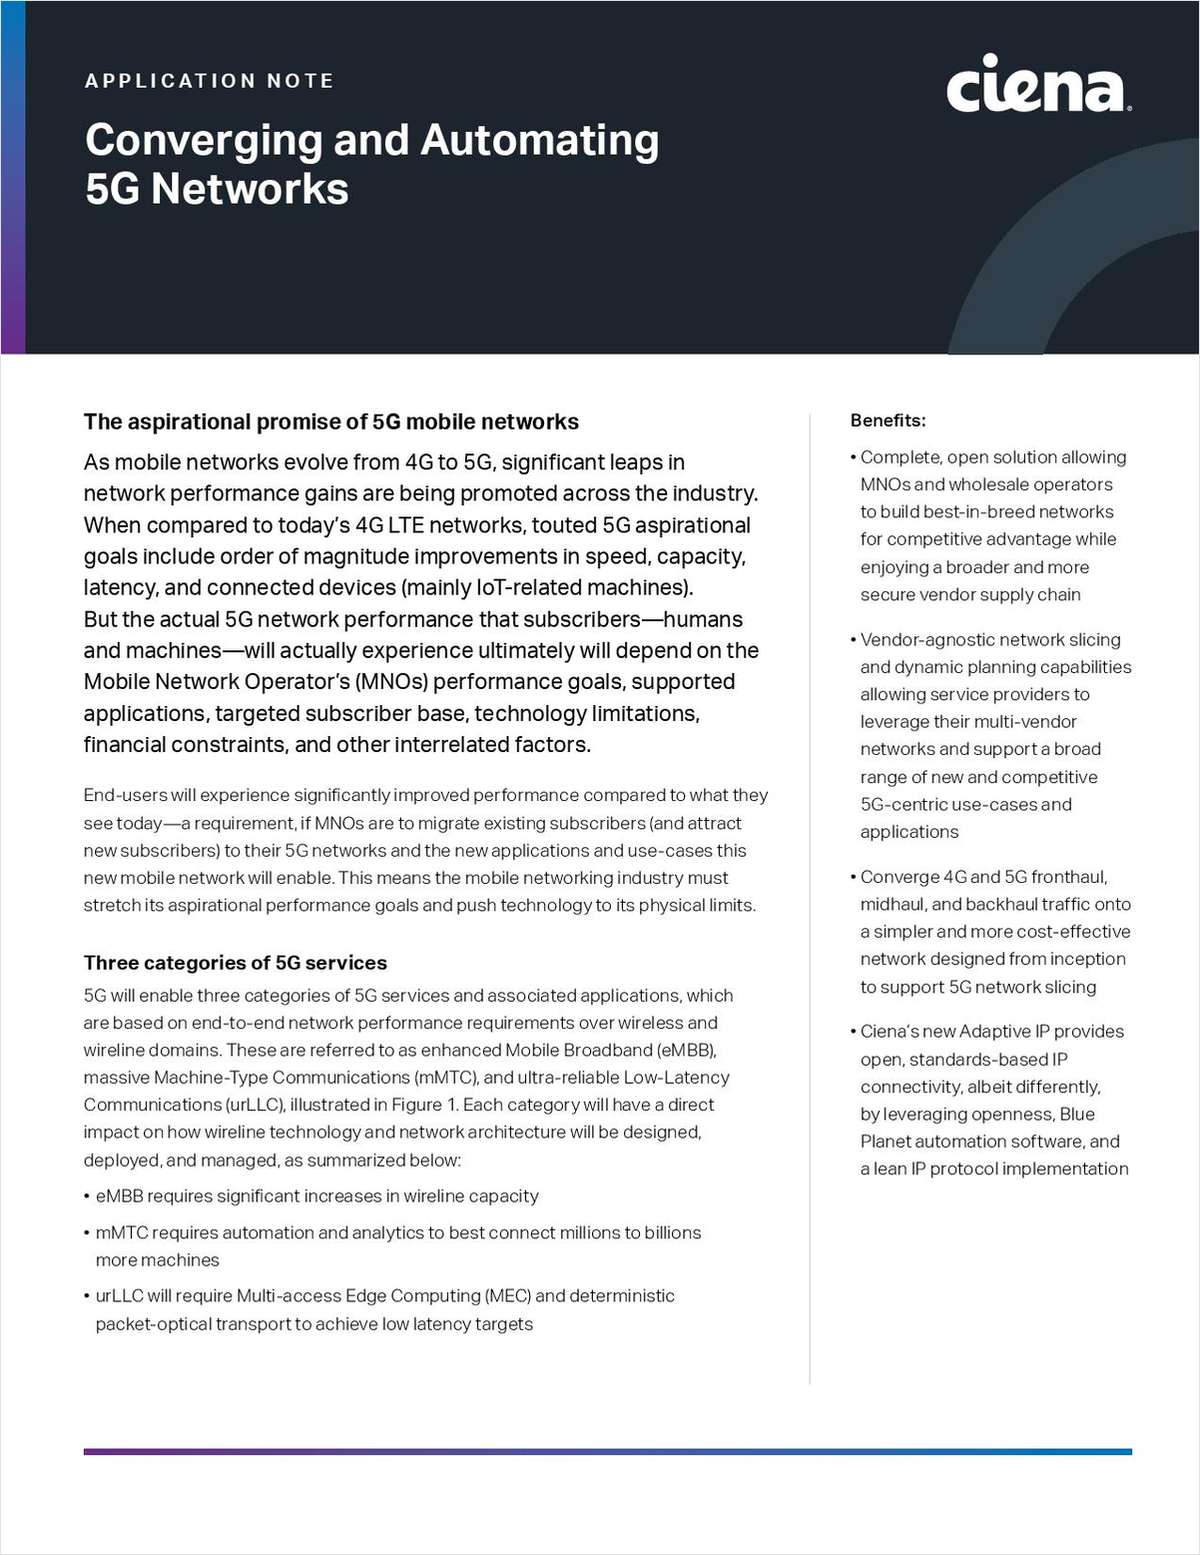 Converging and Automating 5G Networks